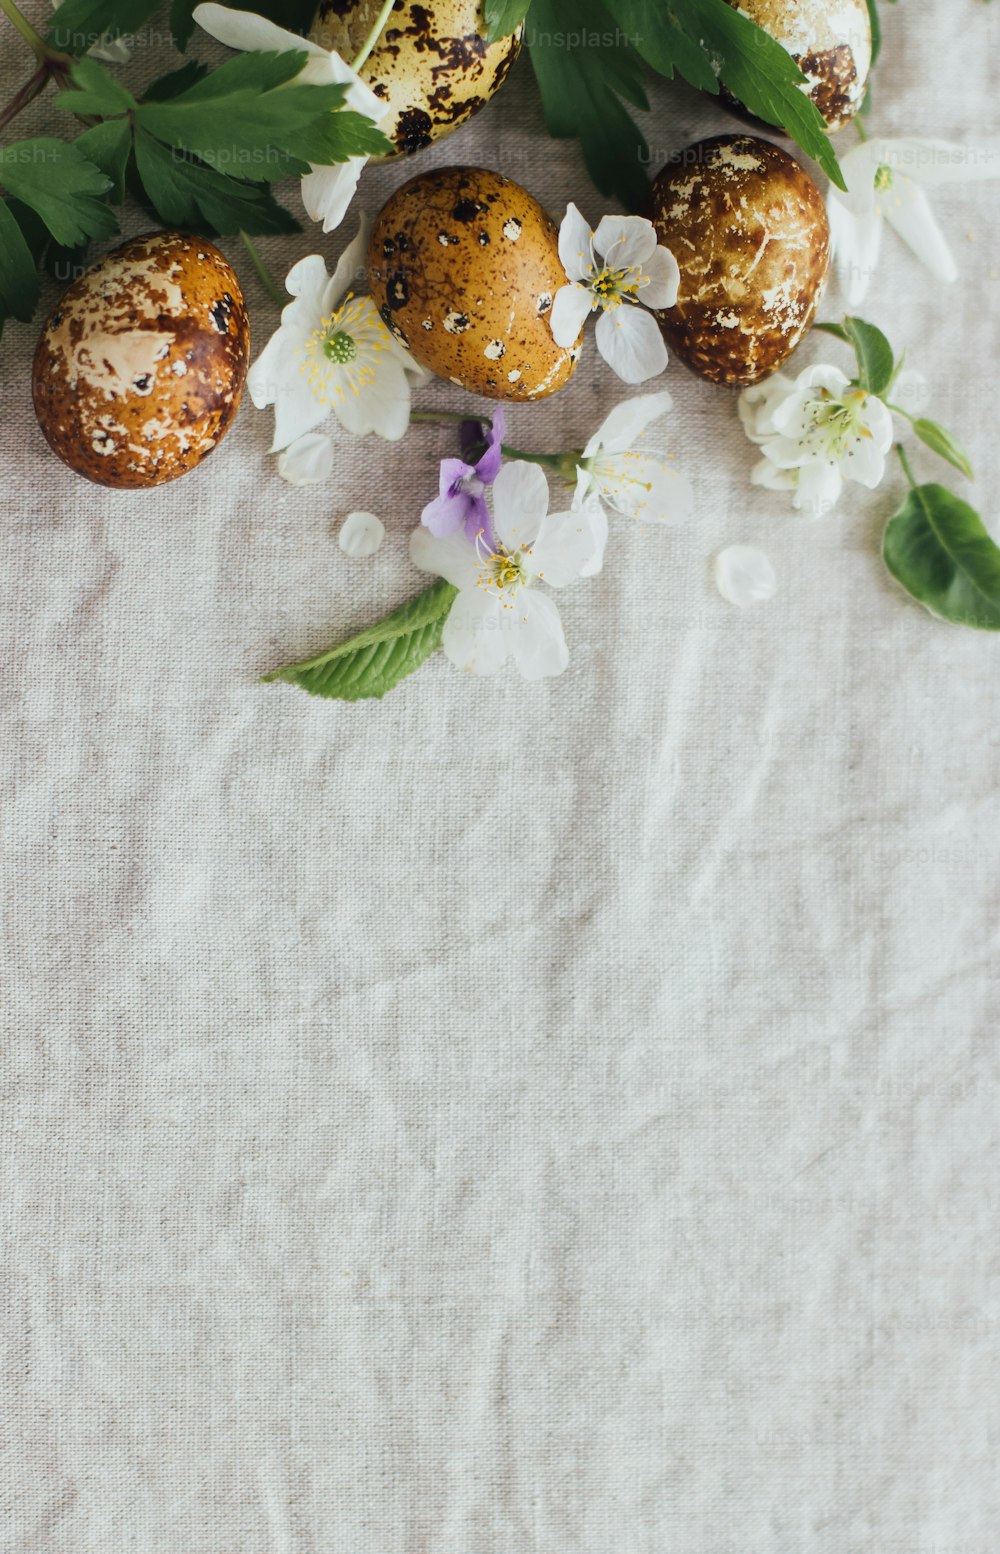 Easter eggs with spring flowers on rustic linen background, flat lay with space for text. Stylish modern easter and quail eggs with natural dye and spring blooms. Aesthetic seasons greeting card